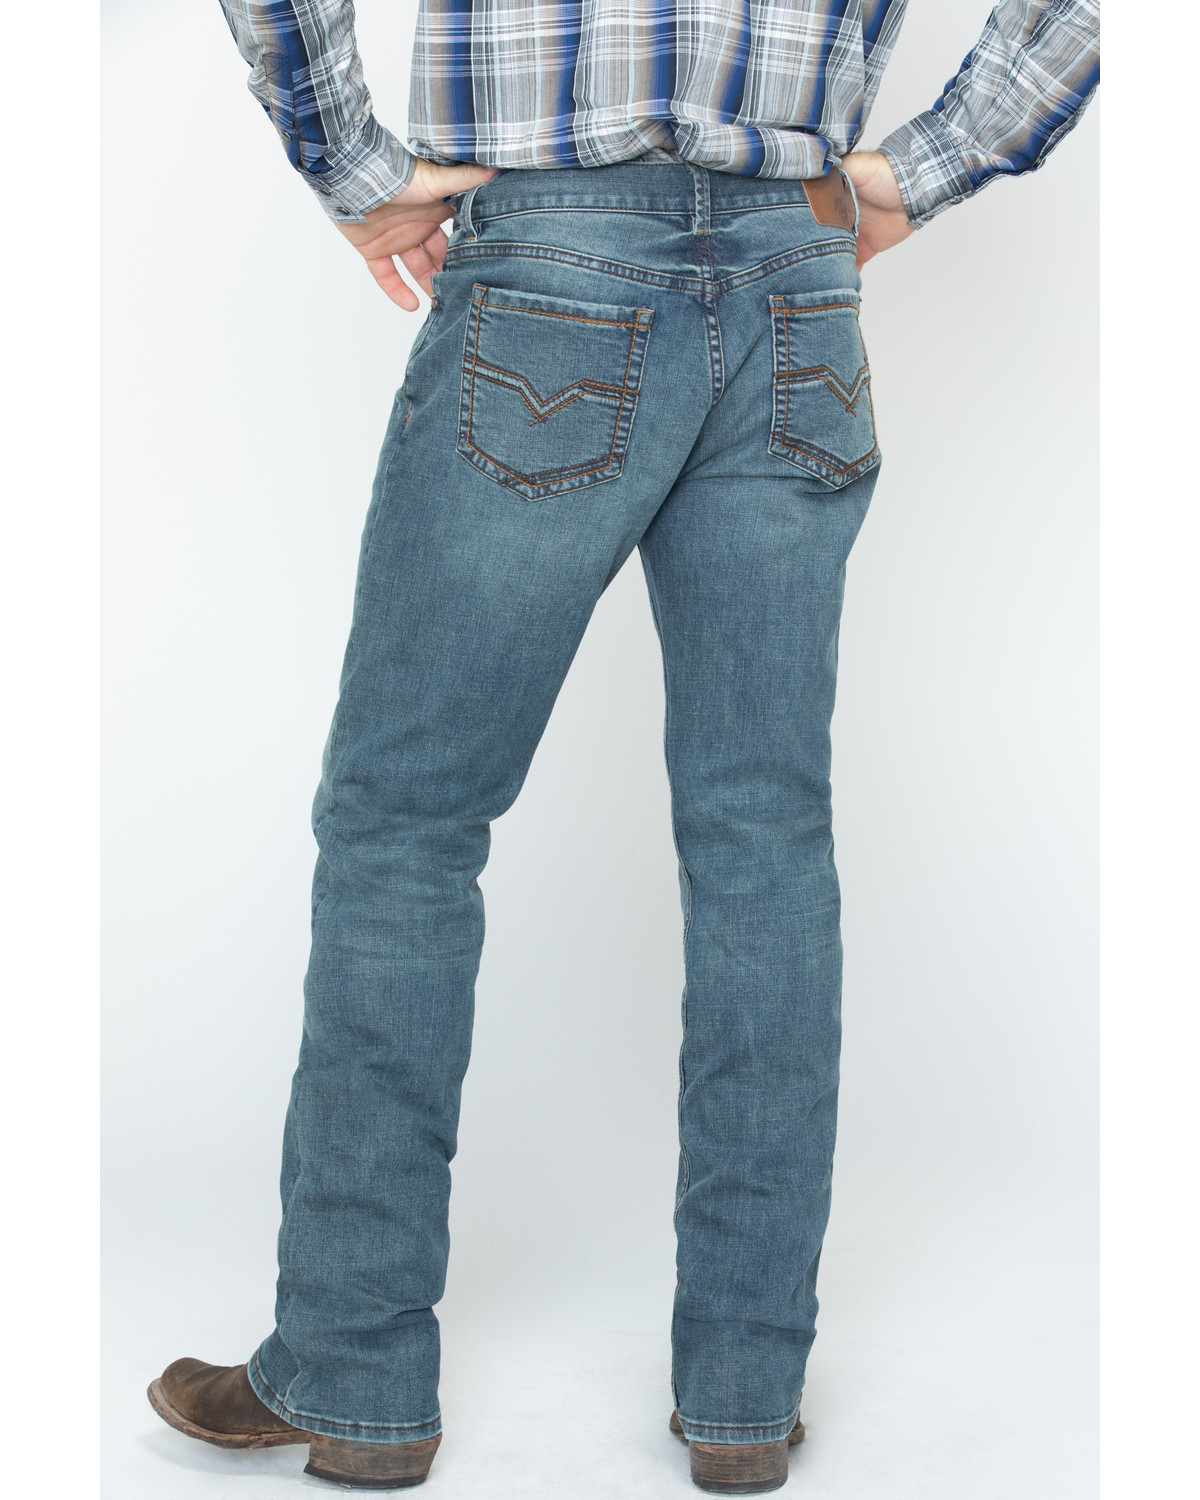 Moonshine Spirit Men's Medium Wash Jeans - Country Outfitter